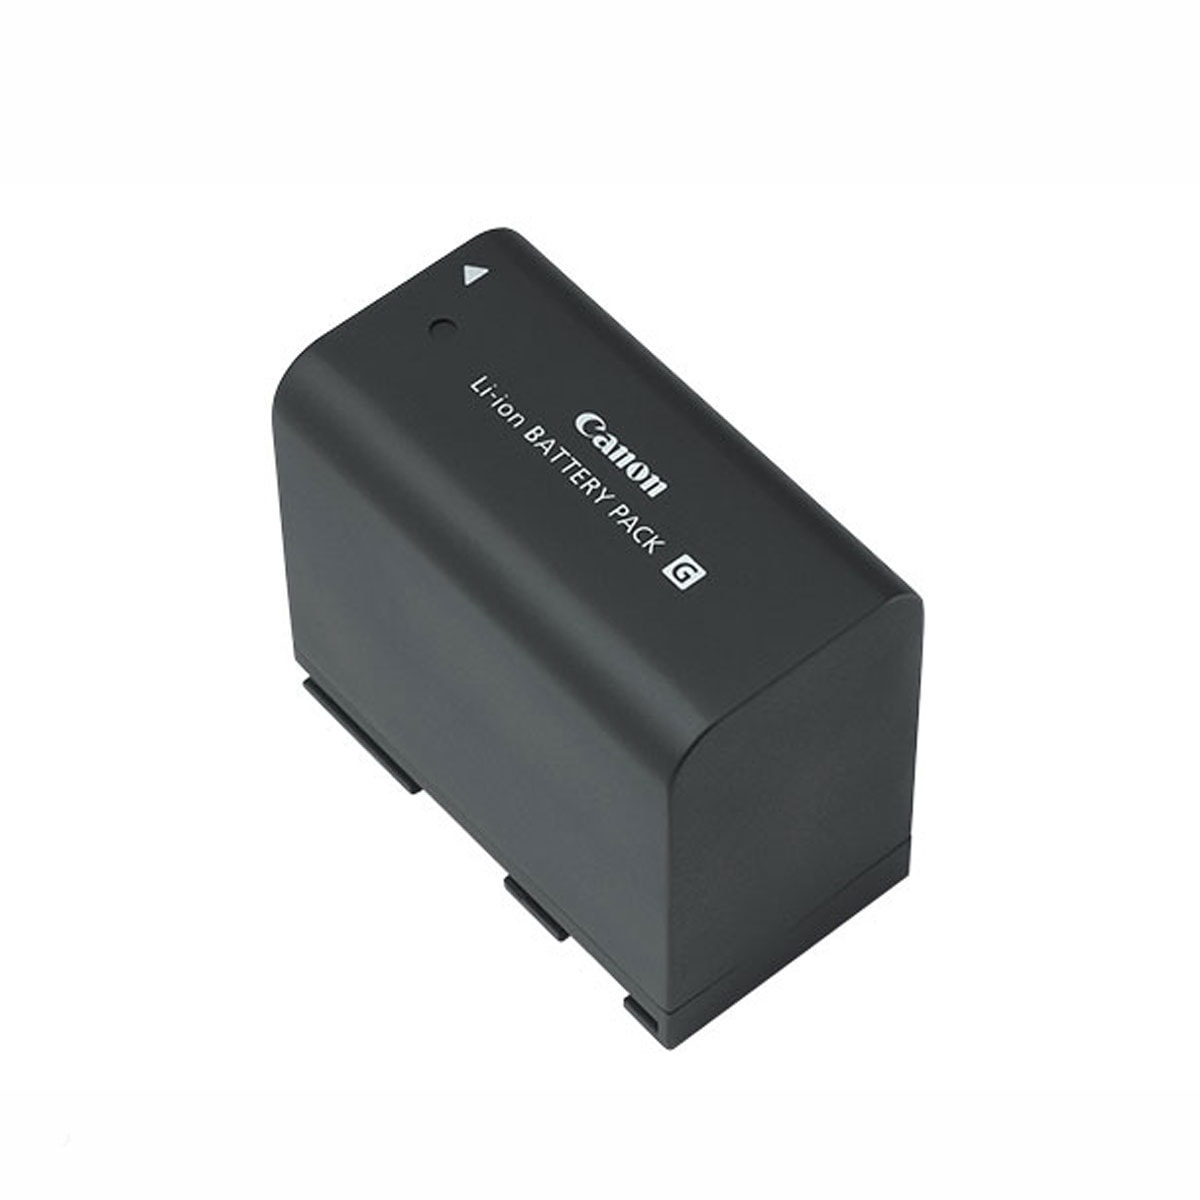 Canon Battery BP-970G for Marshall Monitor